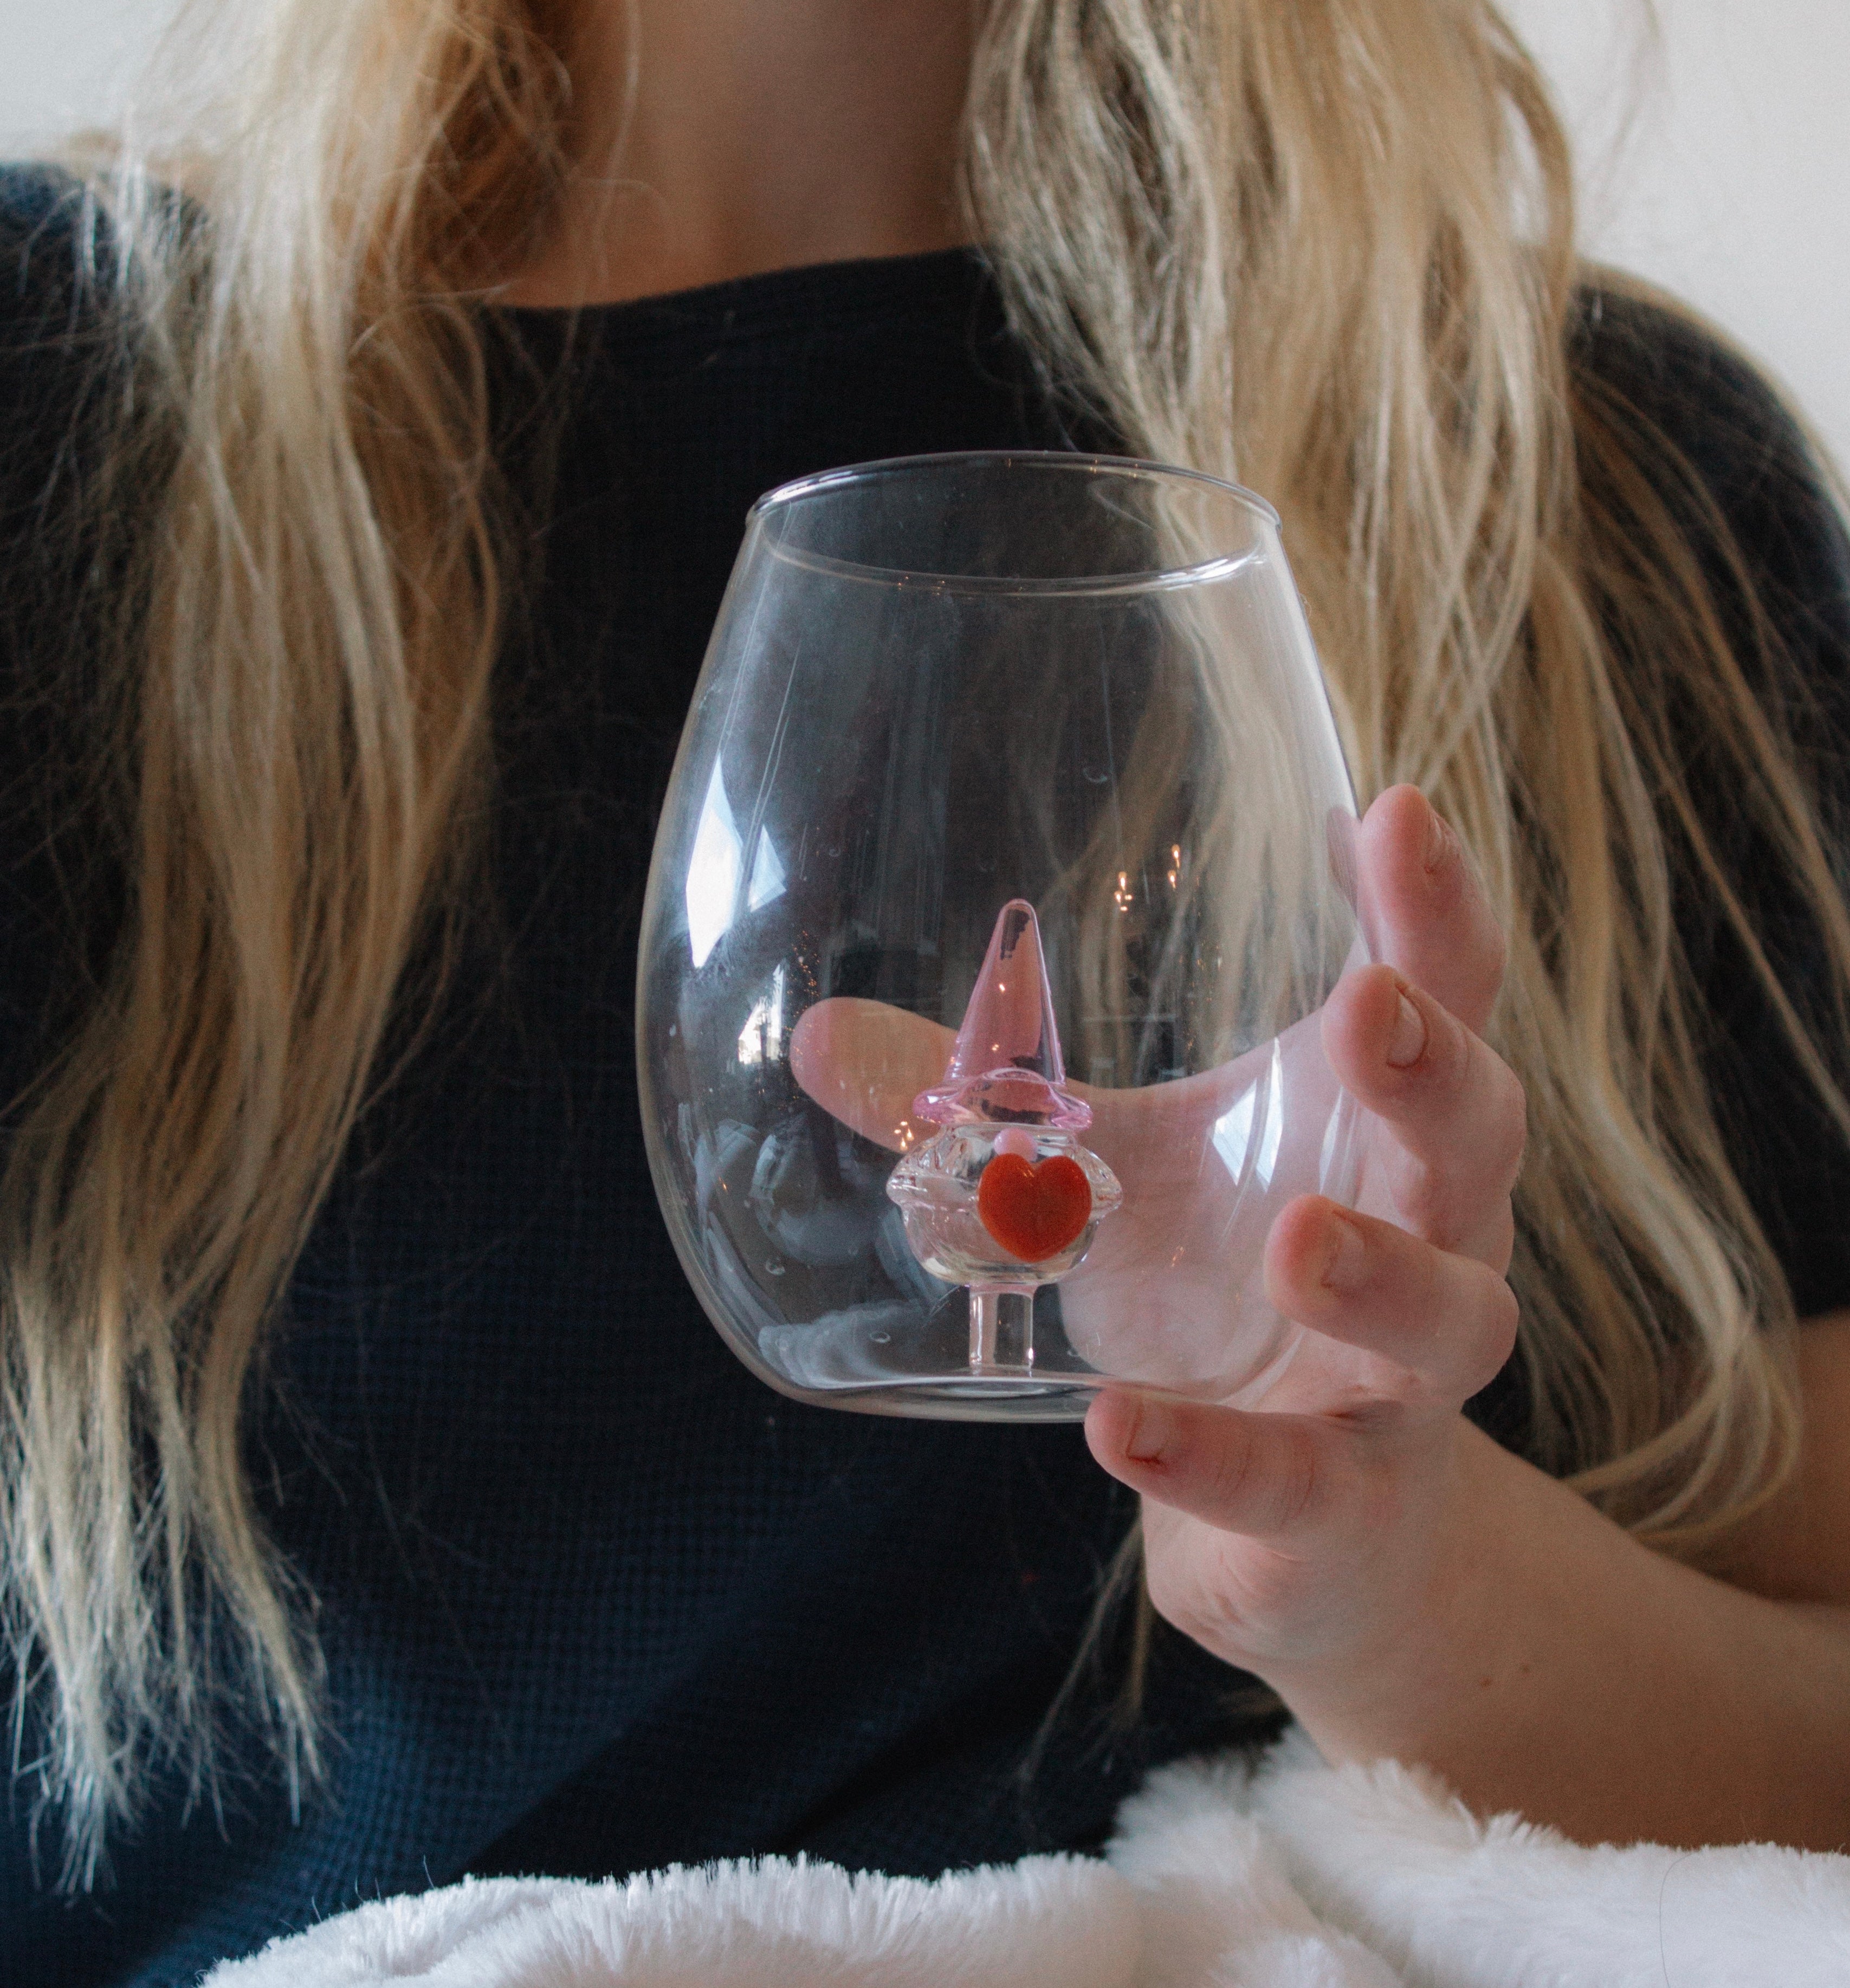 What's the Best Wine Glass to Buy: Stemless or Stemmed? - Eater